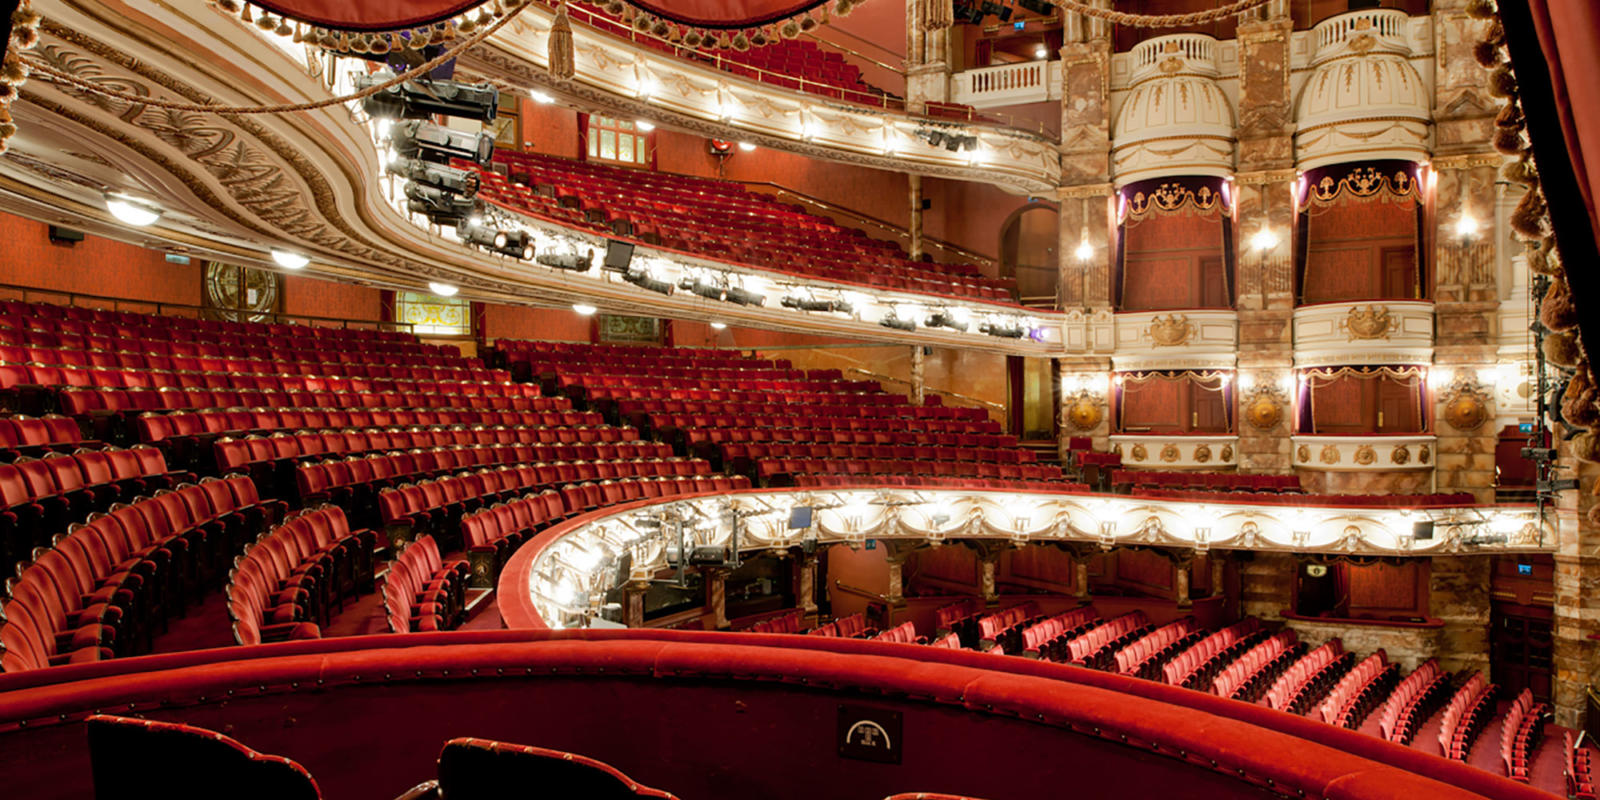 View of the London Coliseum auditorium from a dress circle box